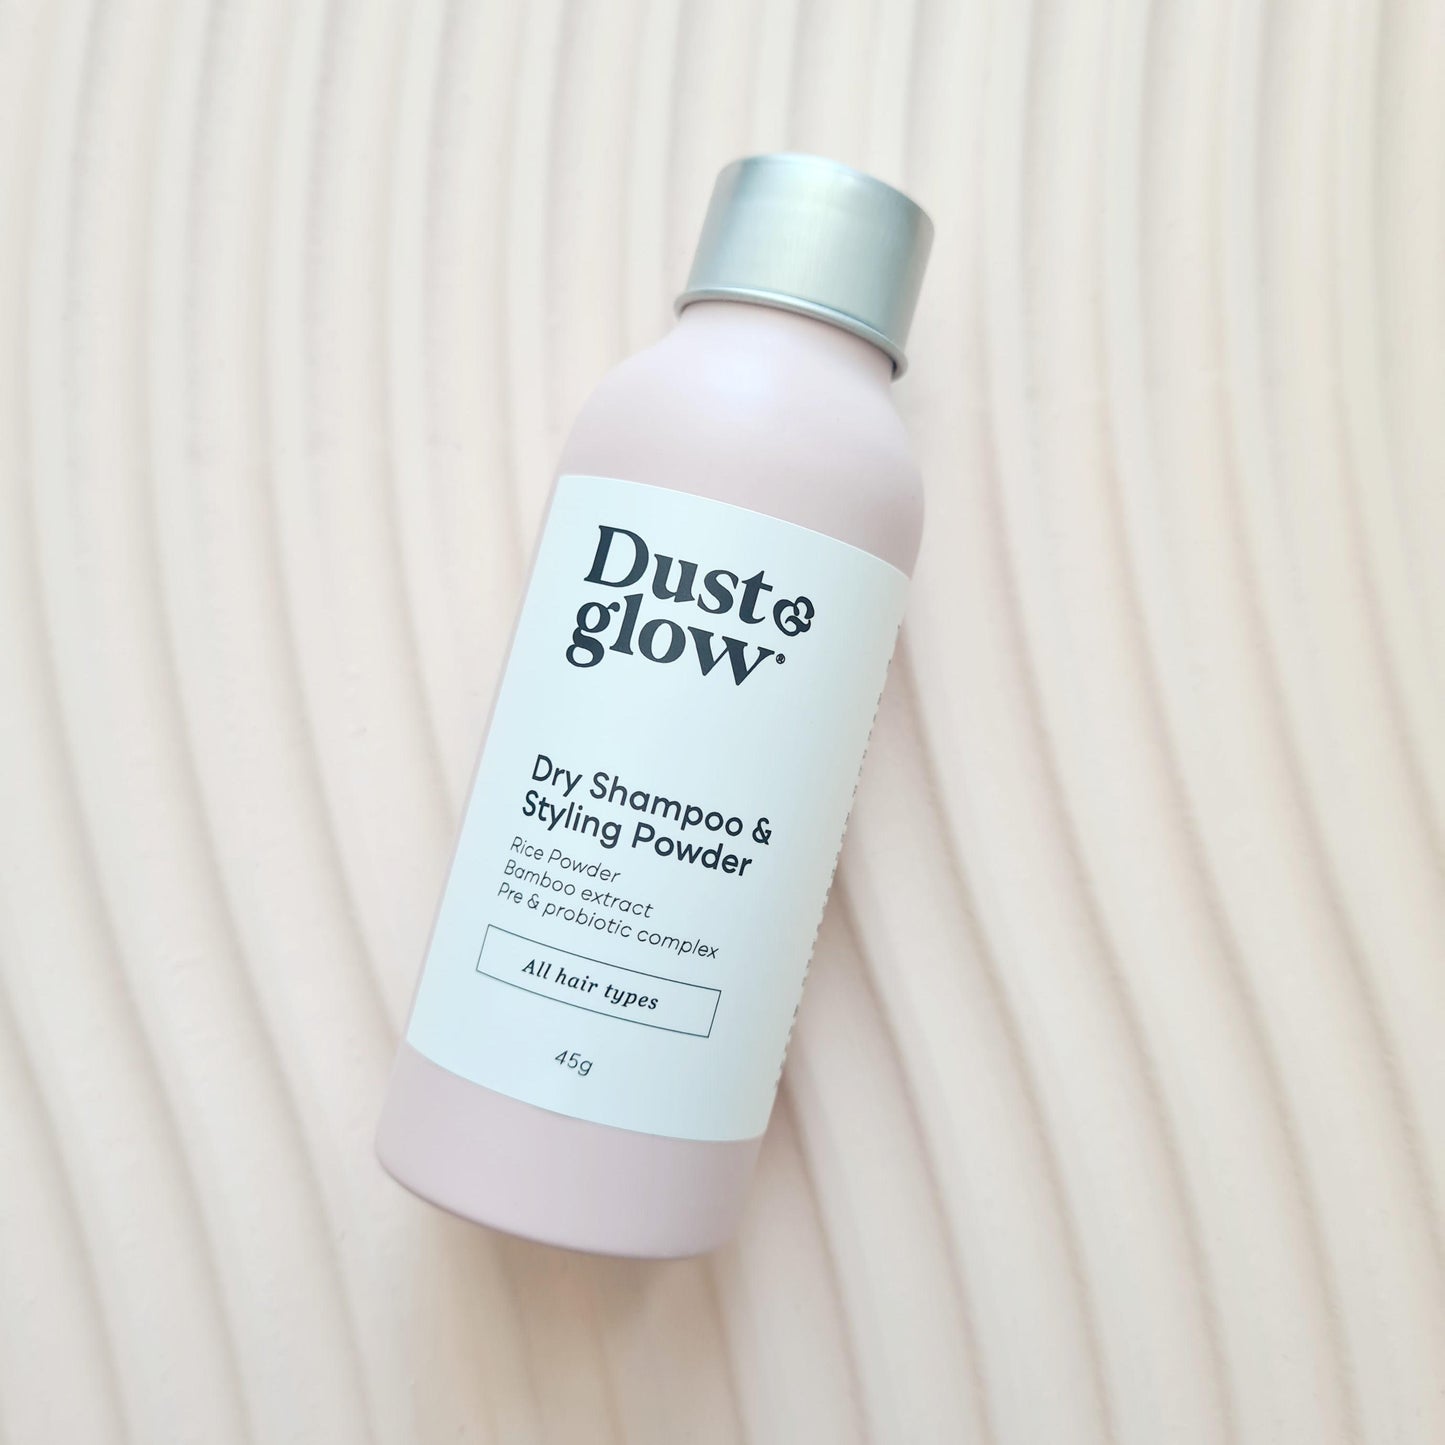 Your benzene free, talc free, natural dry shampoo that works